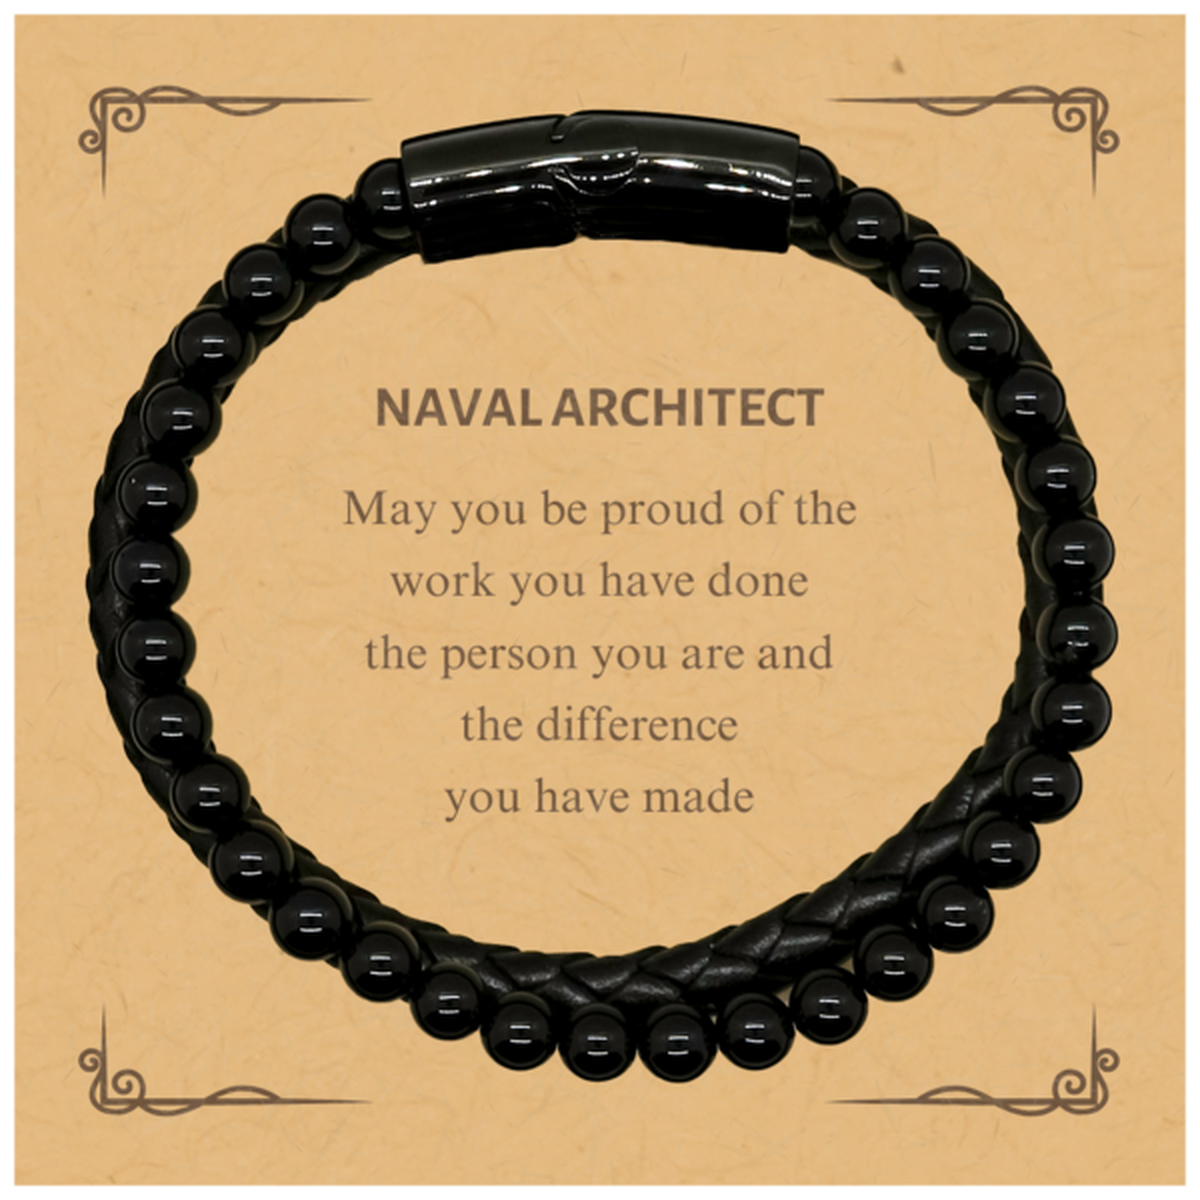 Naval Architect May you be proud of the work you have done, Retirement Naval Architect Stone Leather Bracelets for Colleague Appreciation Gifts Amazing for Naval Architect